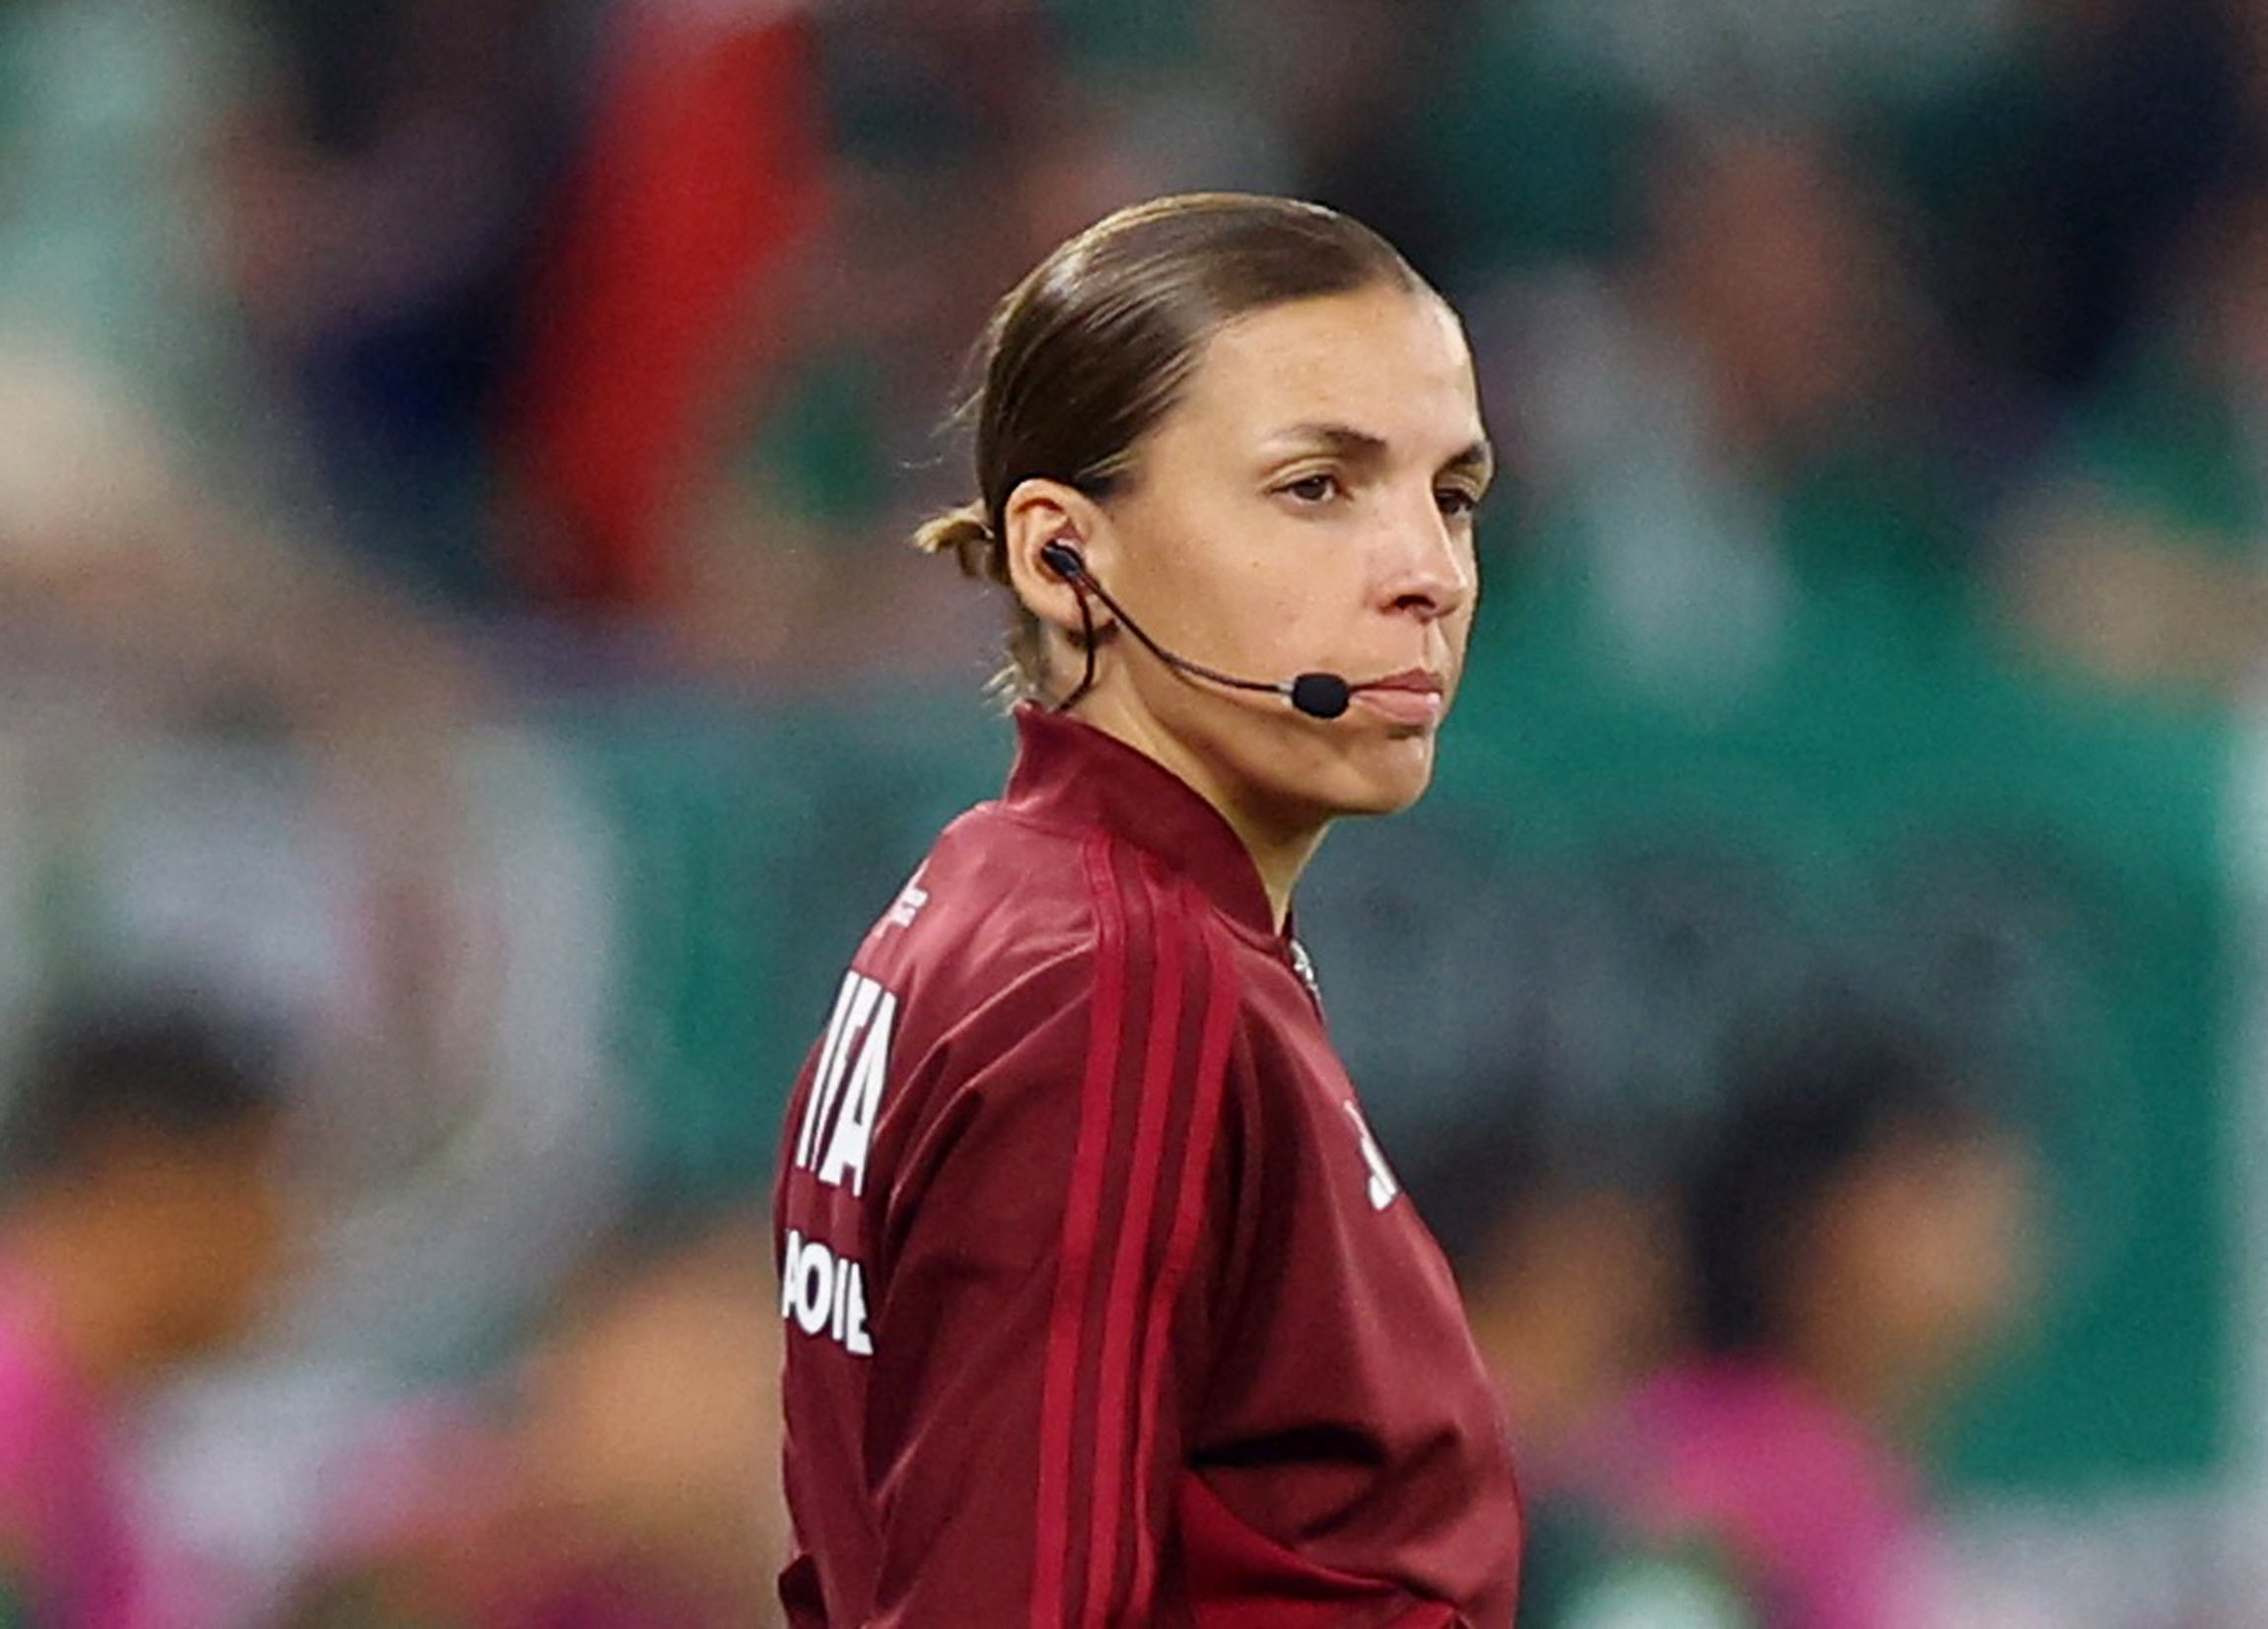 Stephanie Frappart makes history as first female referee for match at men's  World Cup - The Japan Times